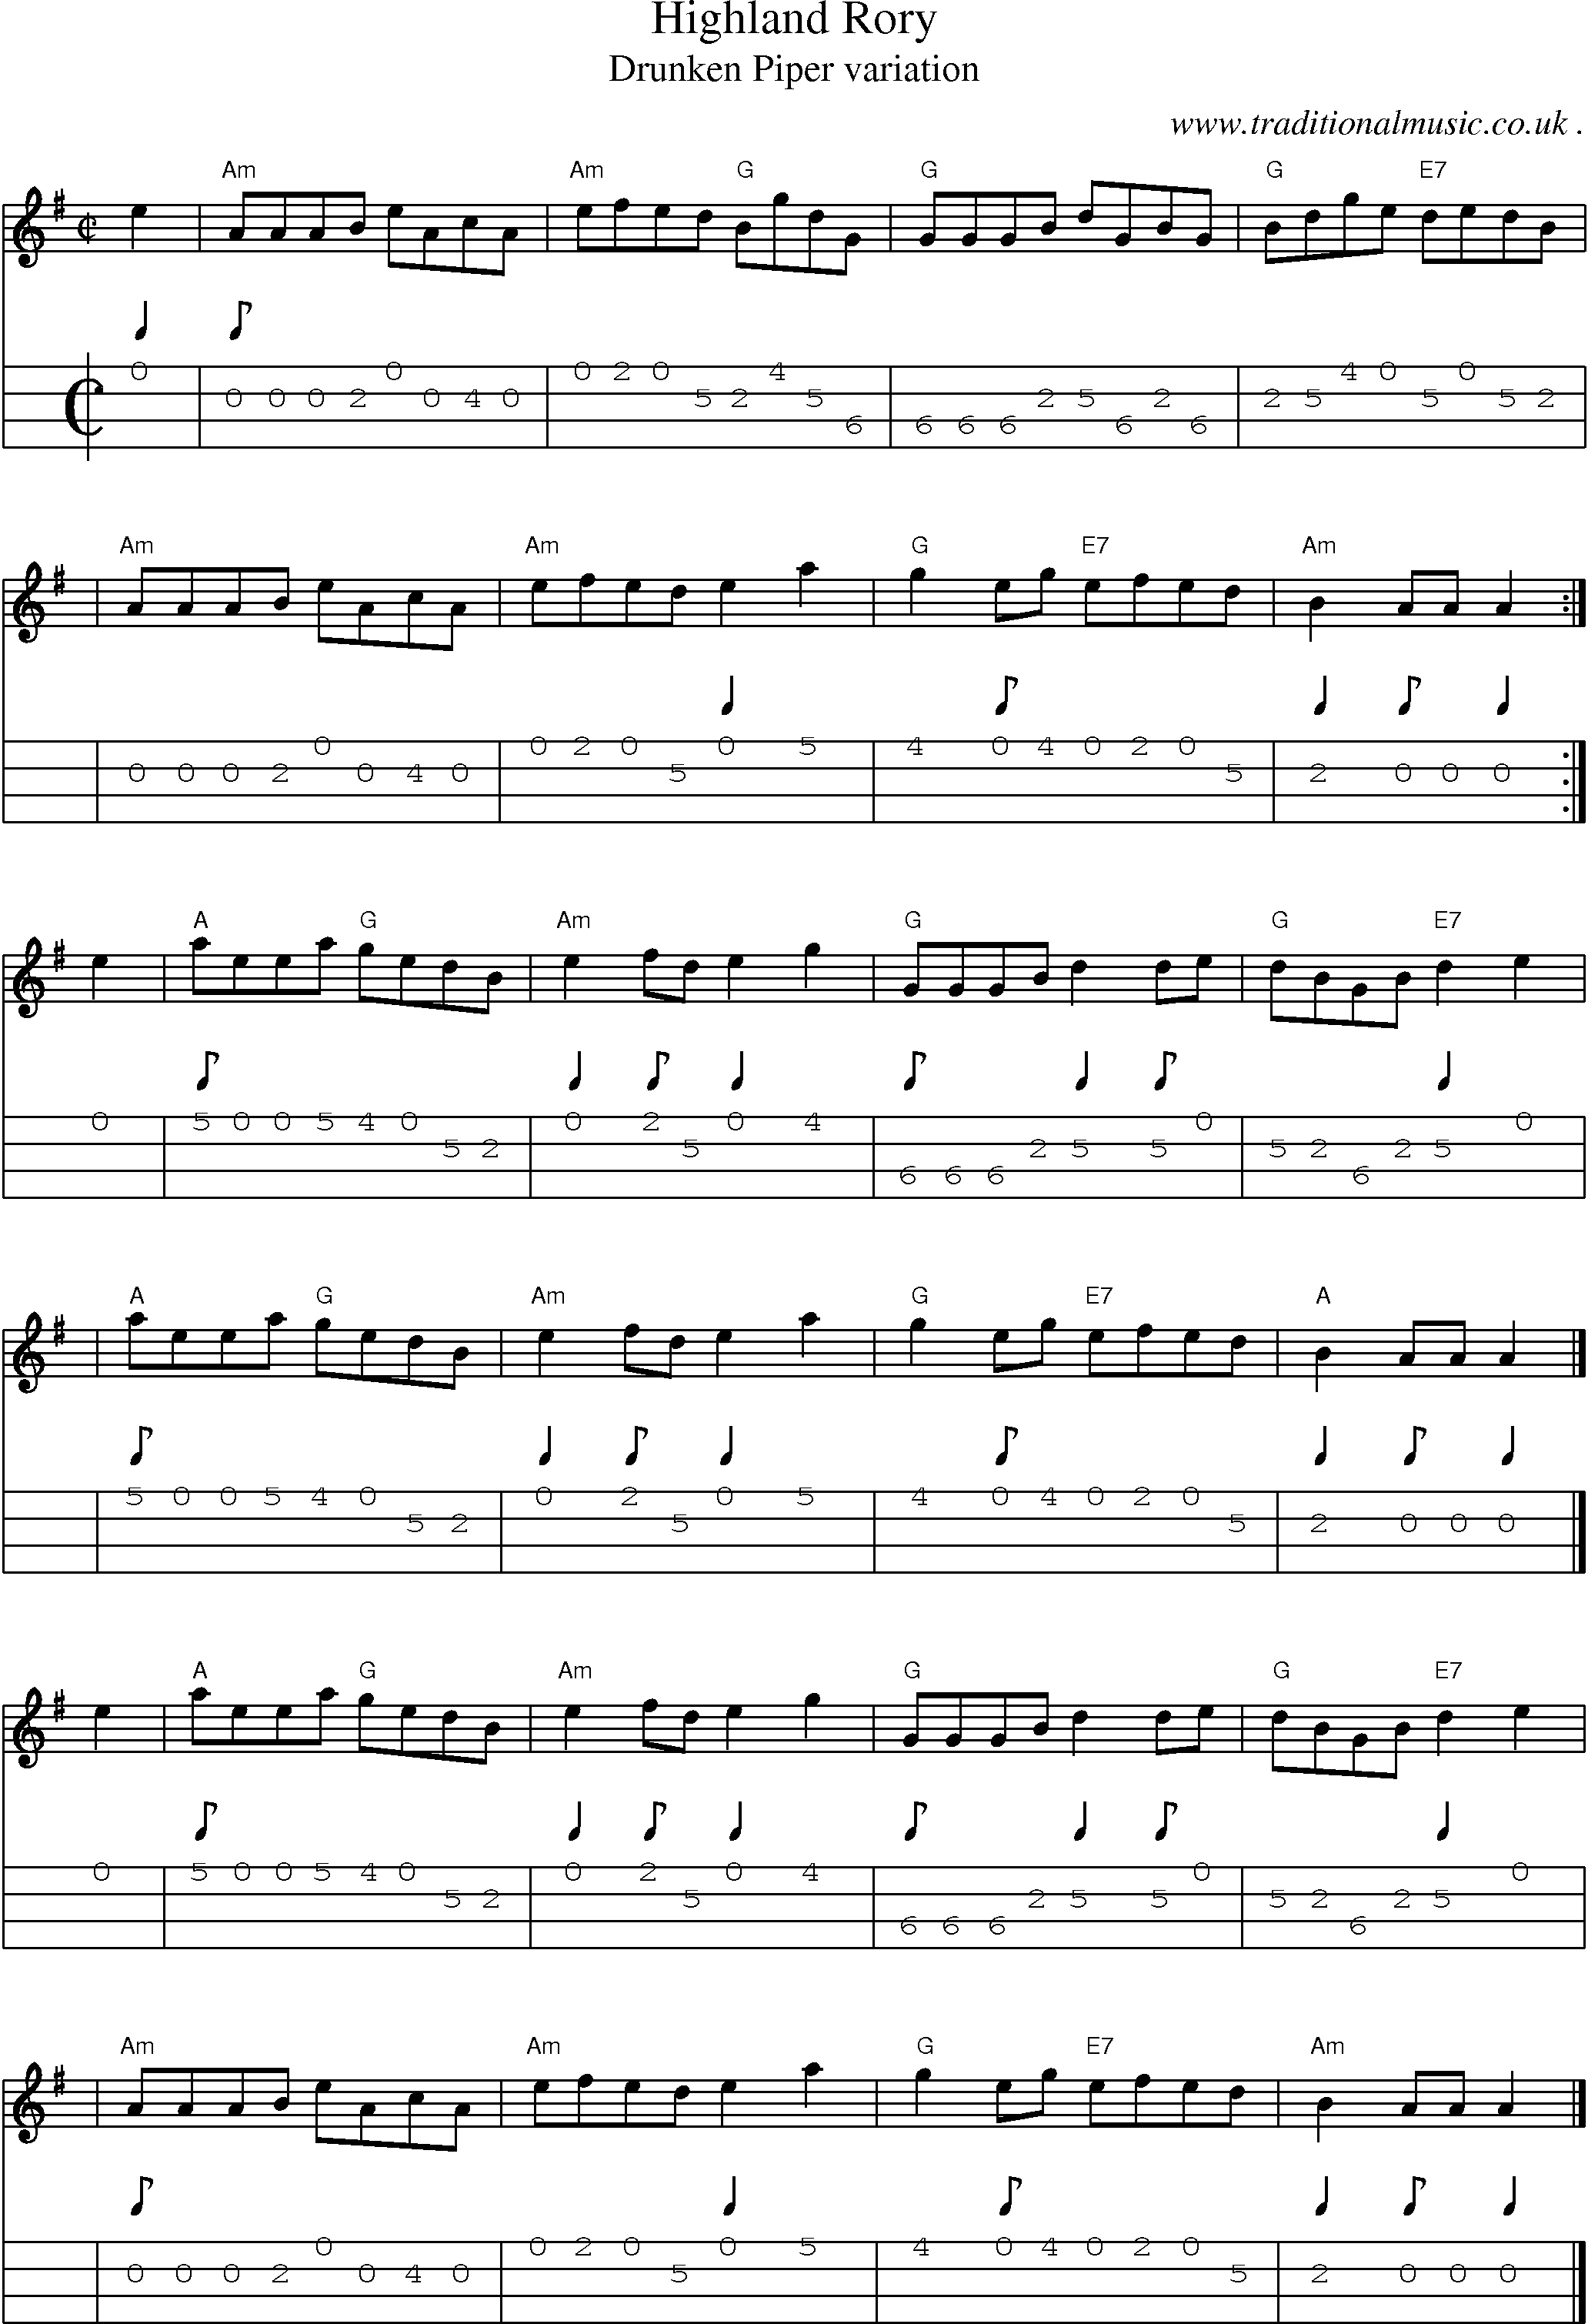 Sheet-music  score, Chords and Mandolin Tabs for Highland Rory